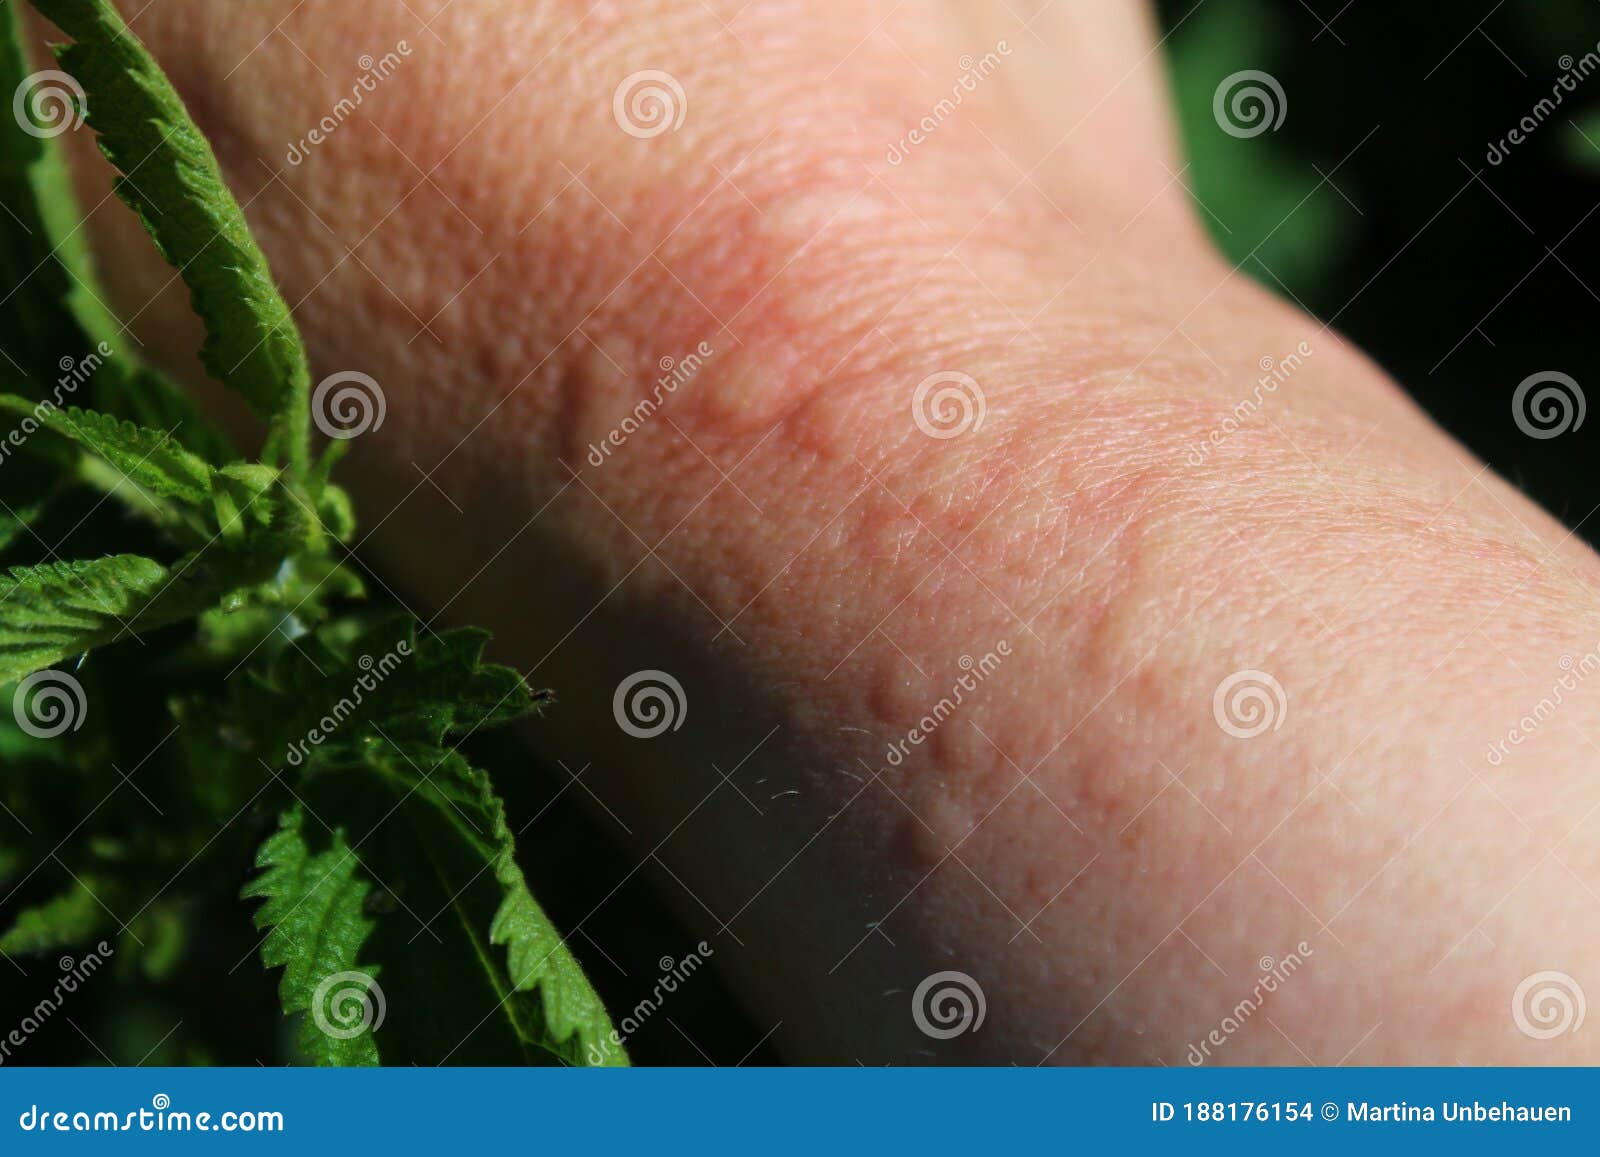 Stinging Nettles And An Arm With Nettle Stings Stock Photo Image Of